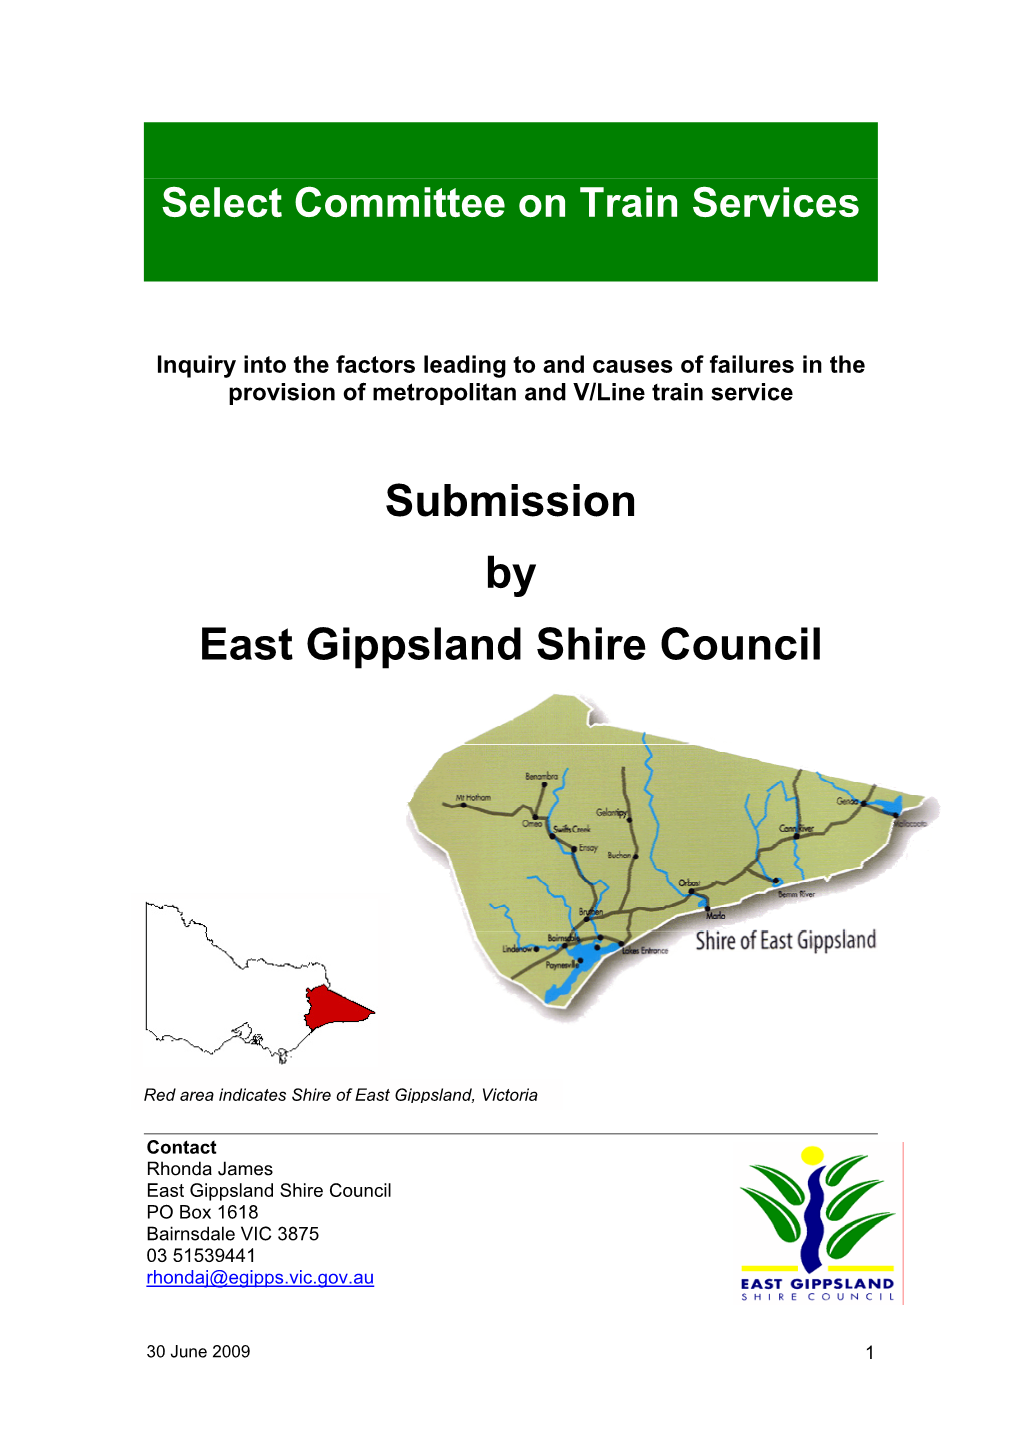 Submission by East Gippsland Shire Council